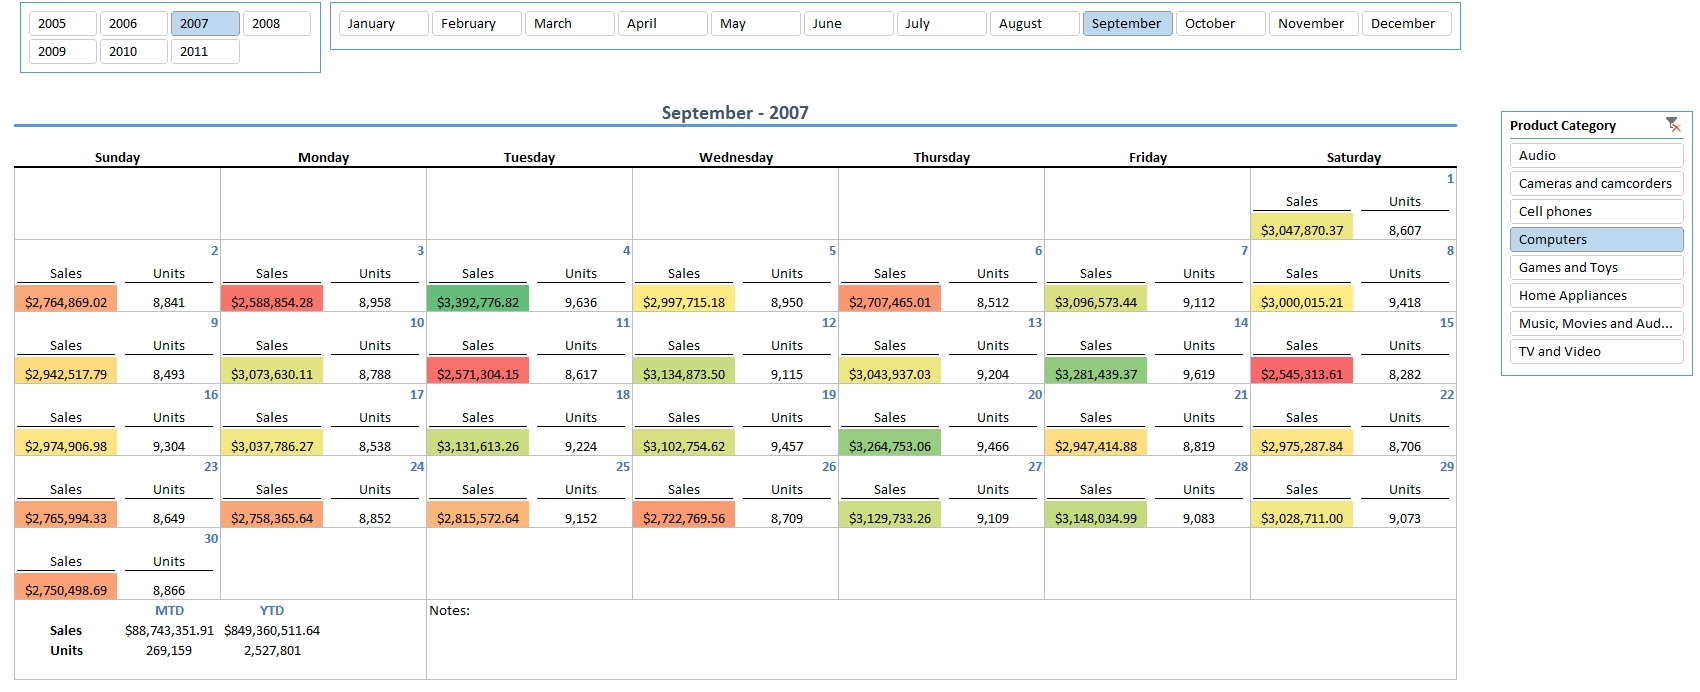 Calendar Reporting With Excel And Power Pivot | Analysis Services Calendar Month Formula In Excel